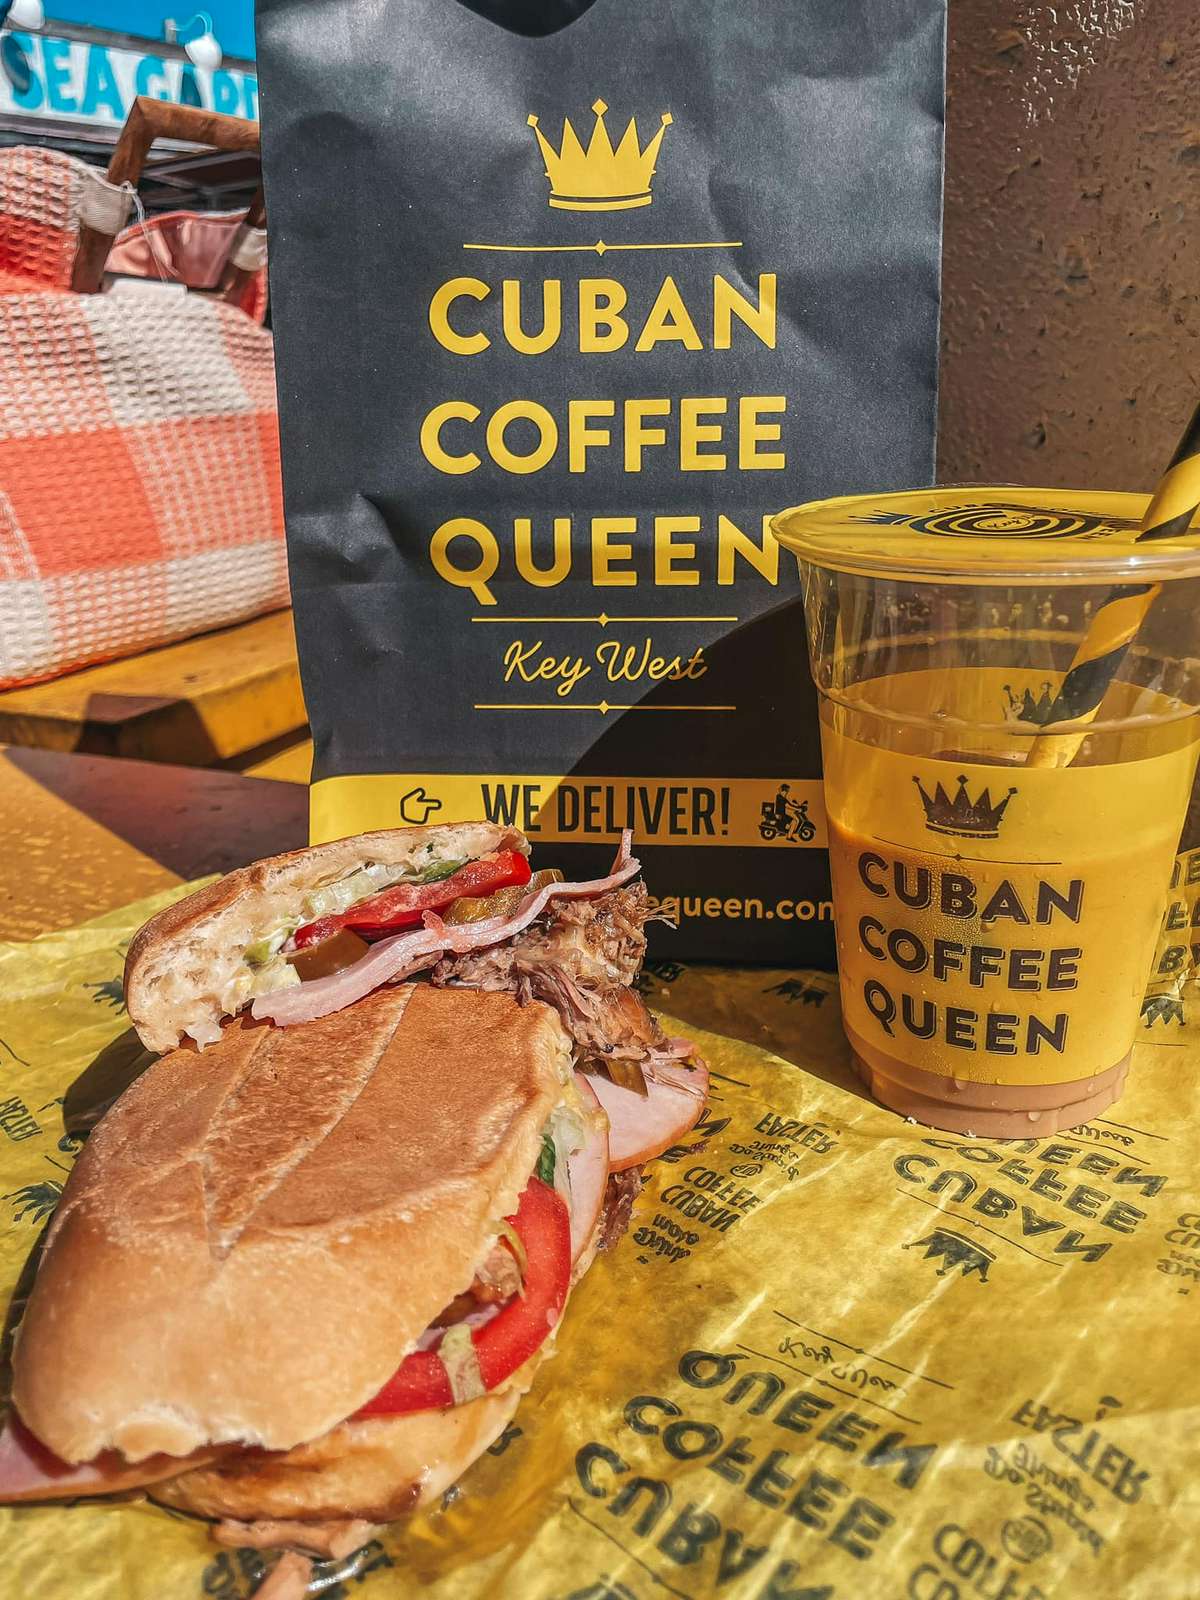 Cuban and iced coffee from Cuban Coffee Queen in Key West